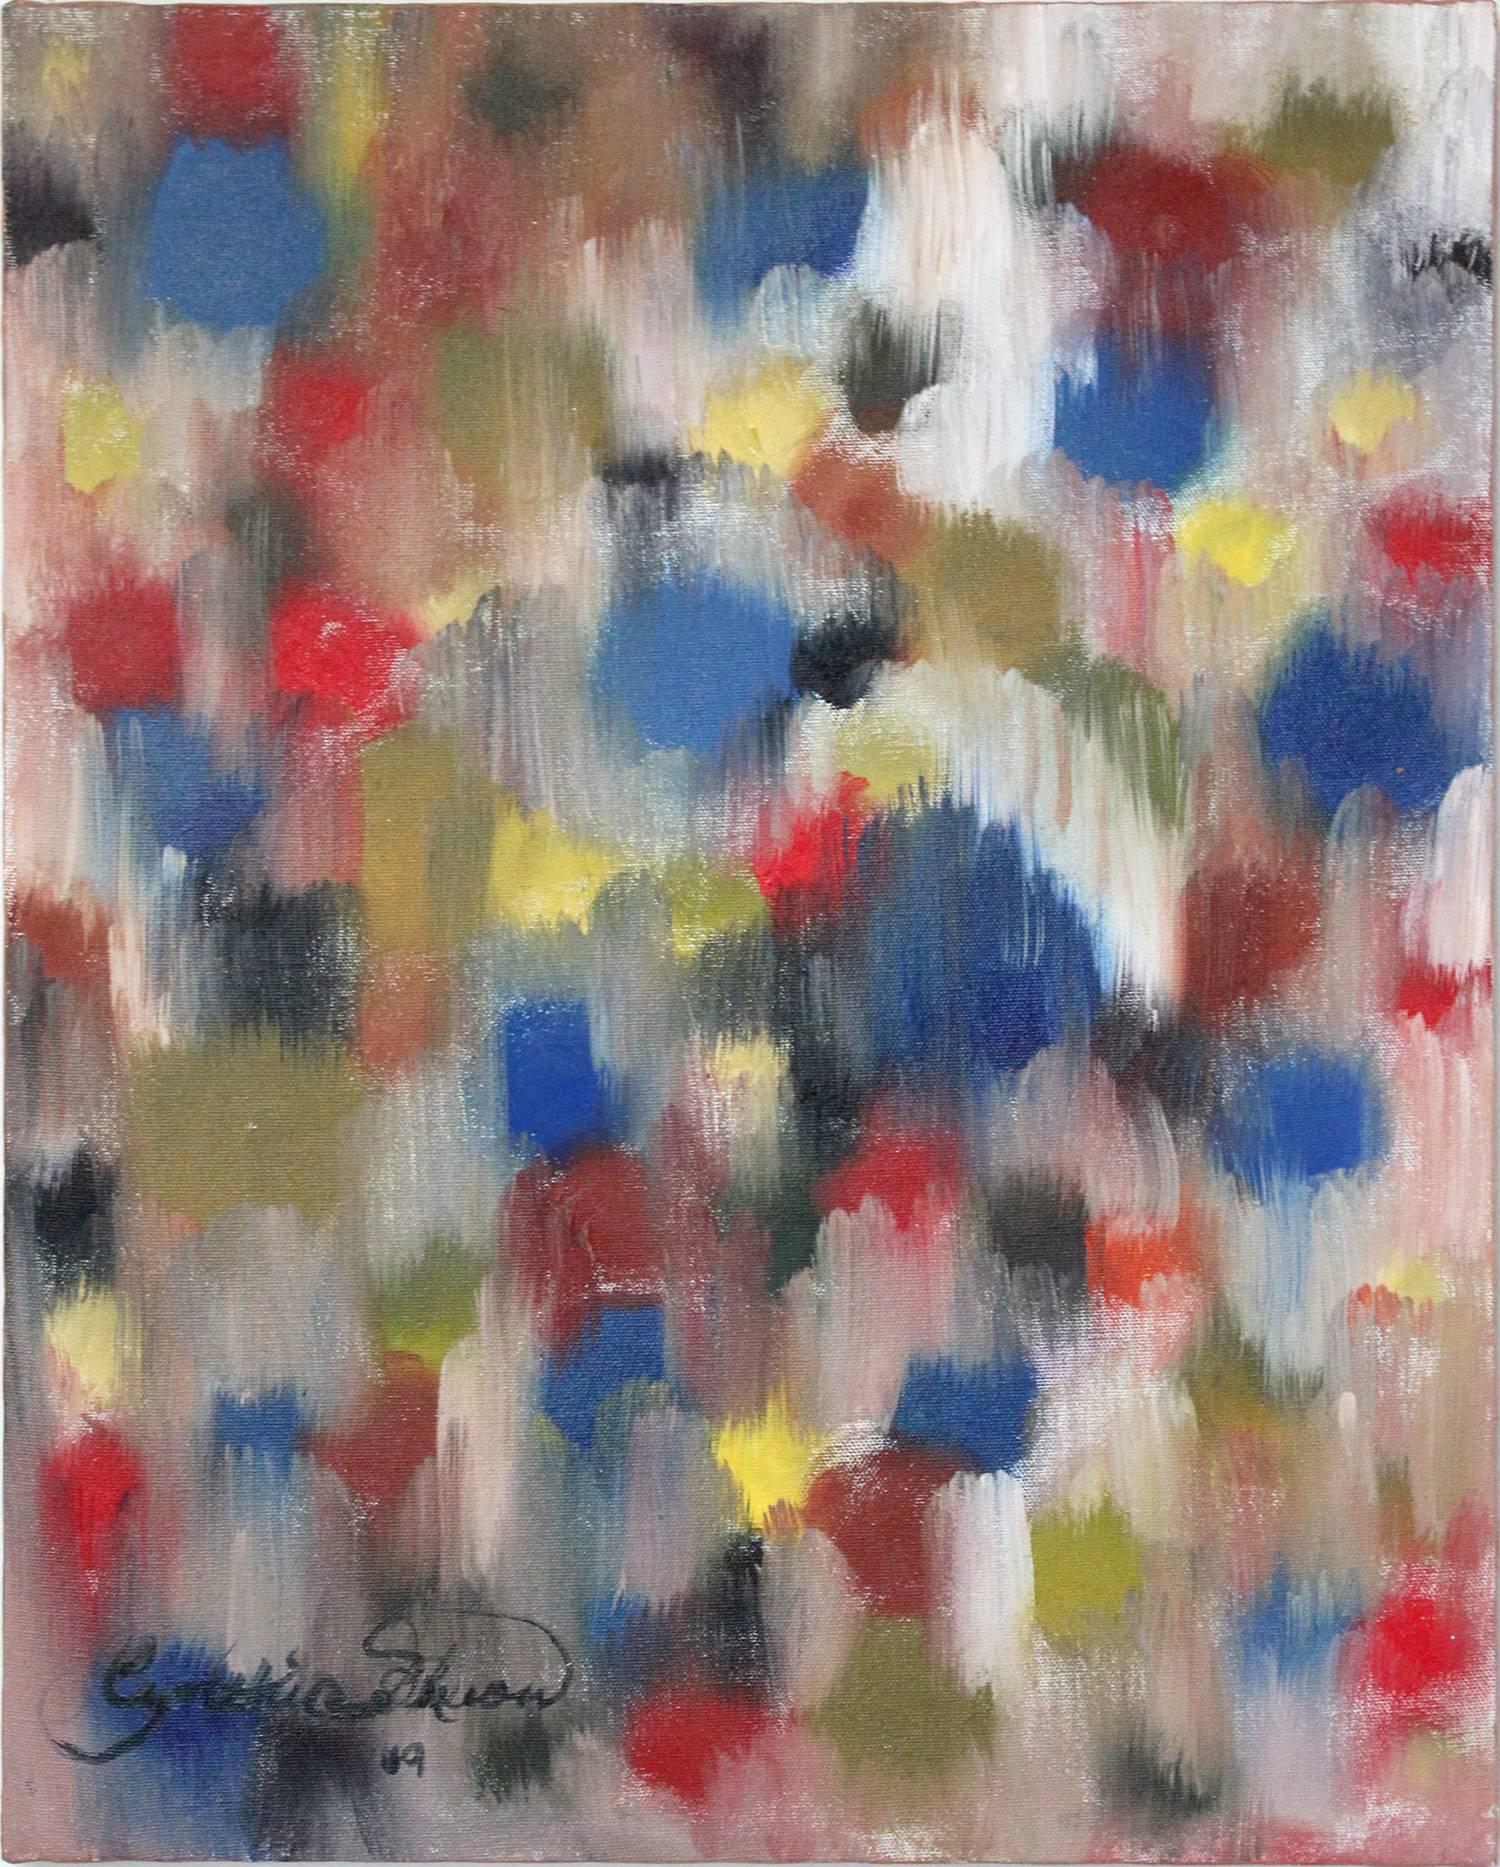 Cindy Shaoul Abstract Painting - "Dripping Dots - Fall Lights” Colorful Contemporary Oil Painting on Canvas